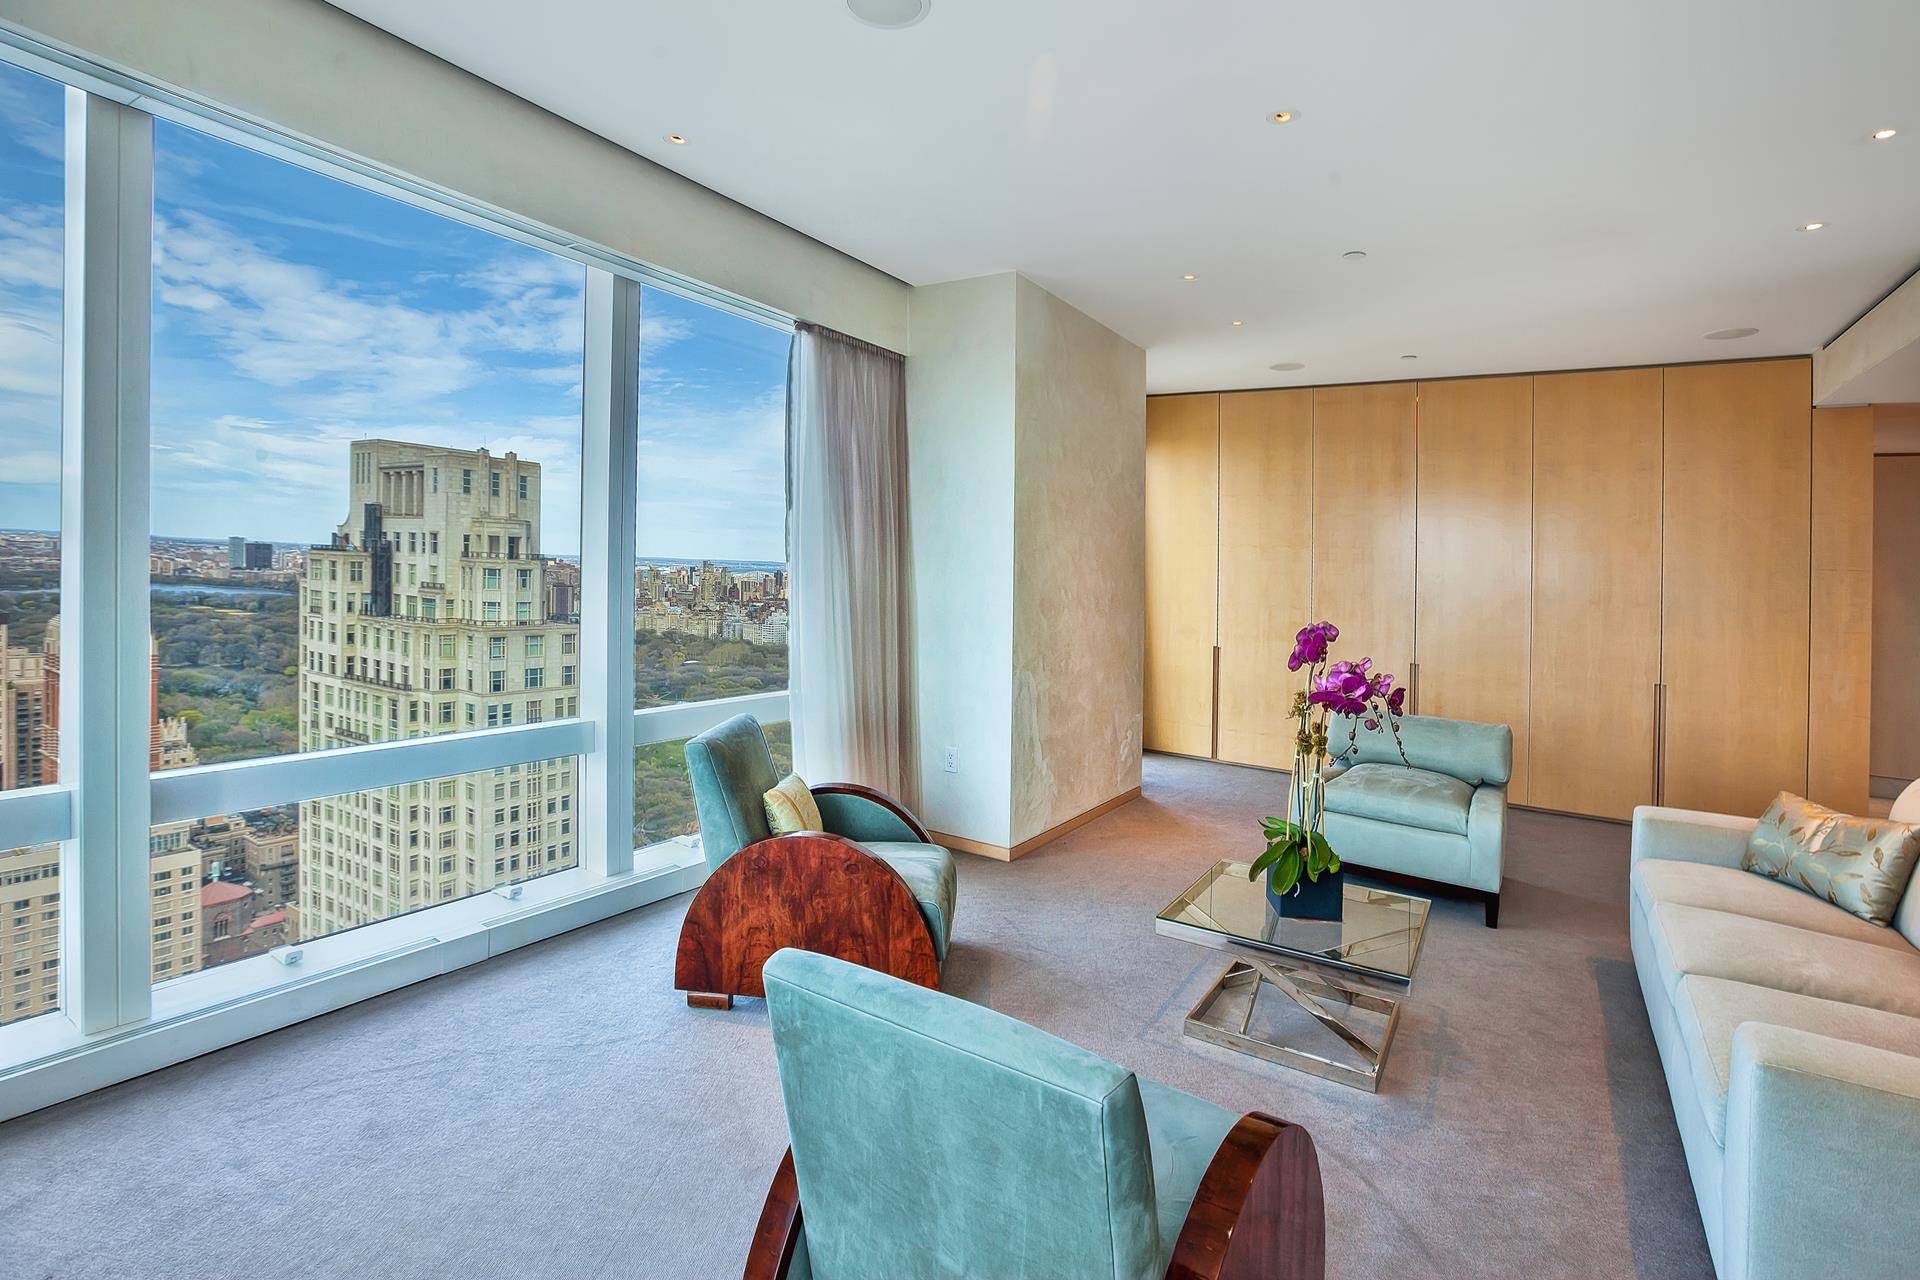 Perched atop the luxurious Mandarin Oriental Hotel Residences of the Time Warner Center, this North Tower 64th Floor stunning designer renovated and furnished 2 bedroom and 2 bathroom home, designed ...